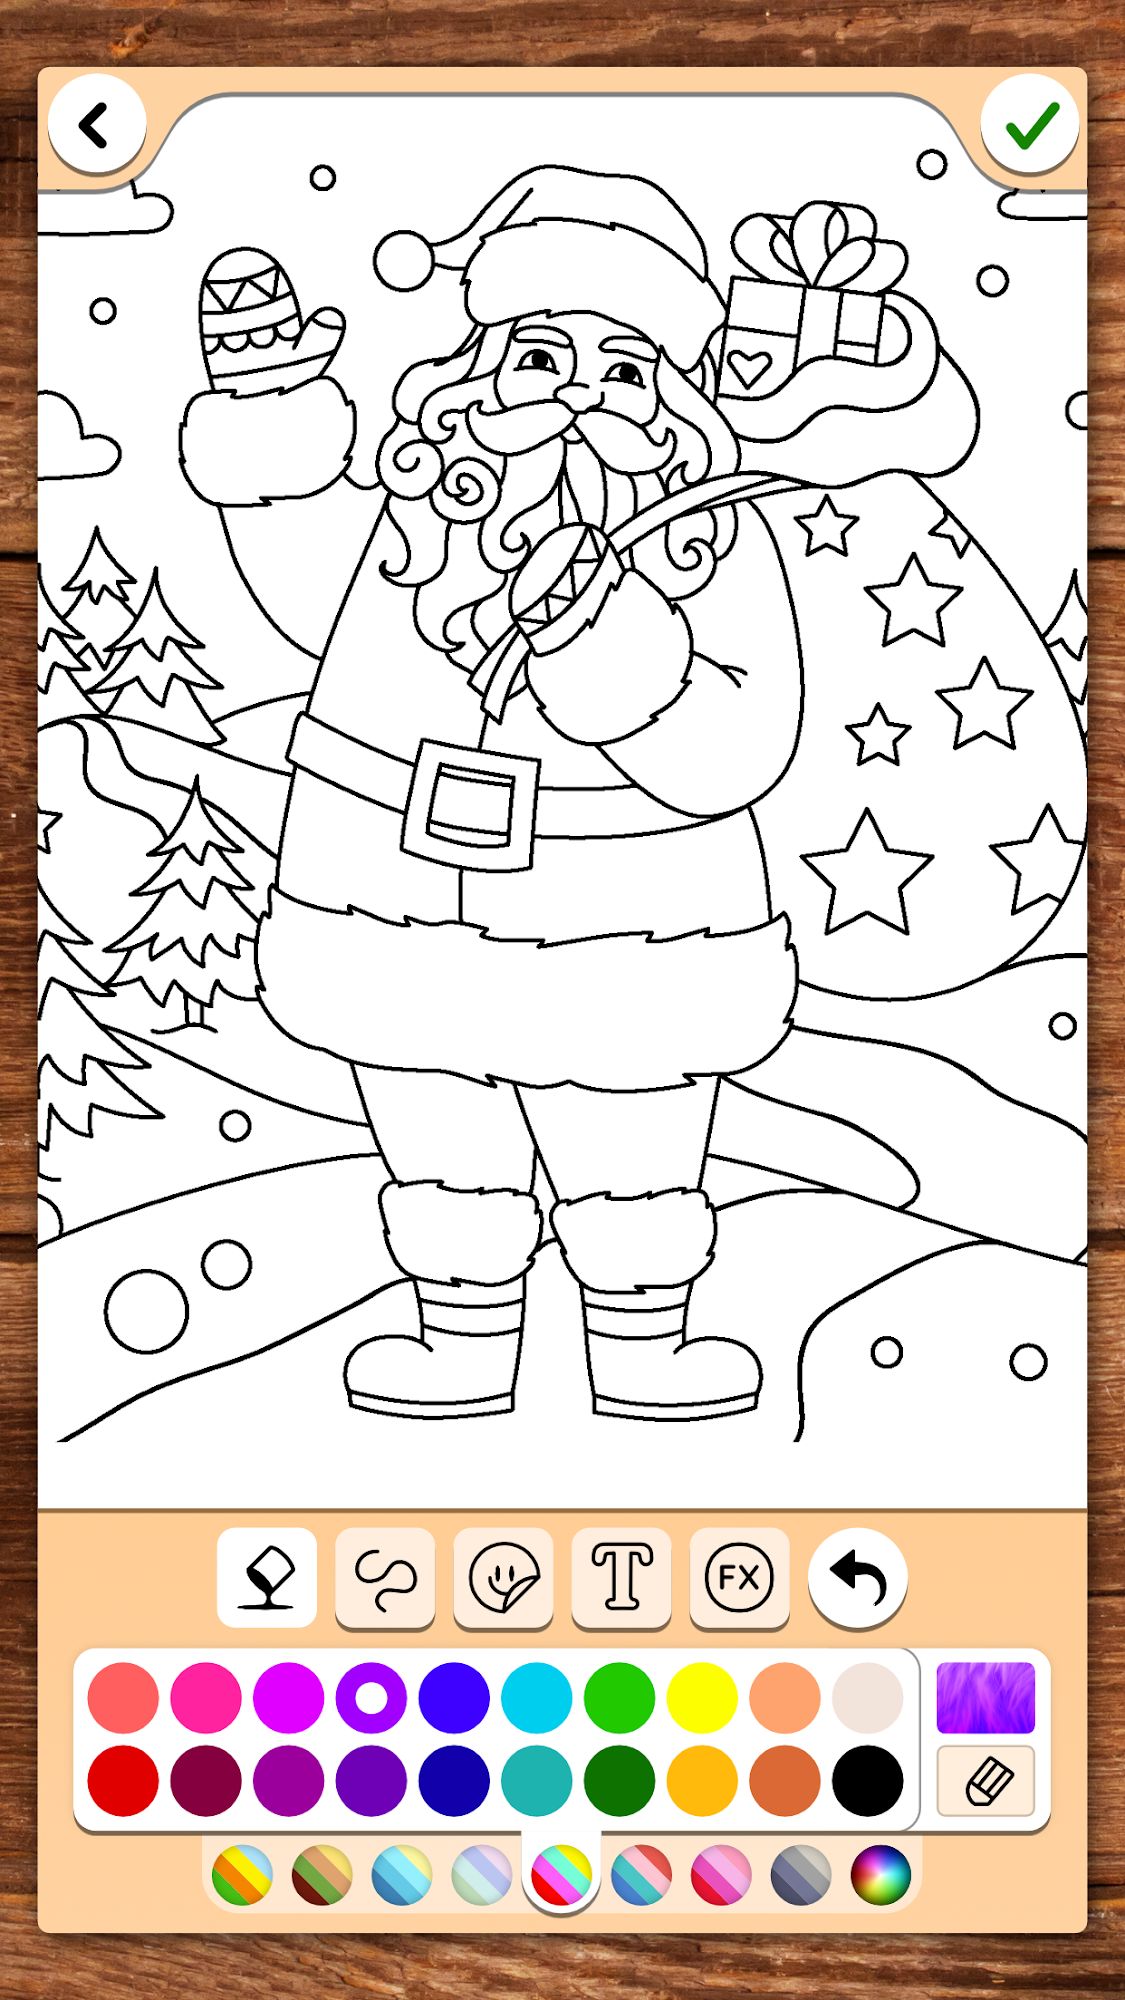 Scarica Christmas Coloring gratis per Android.